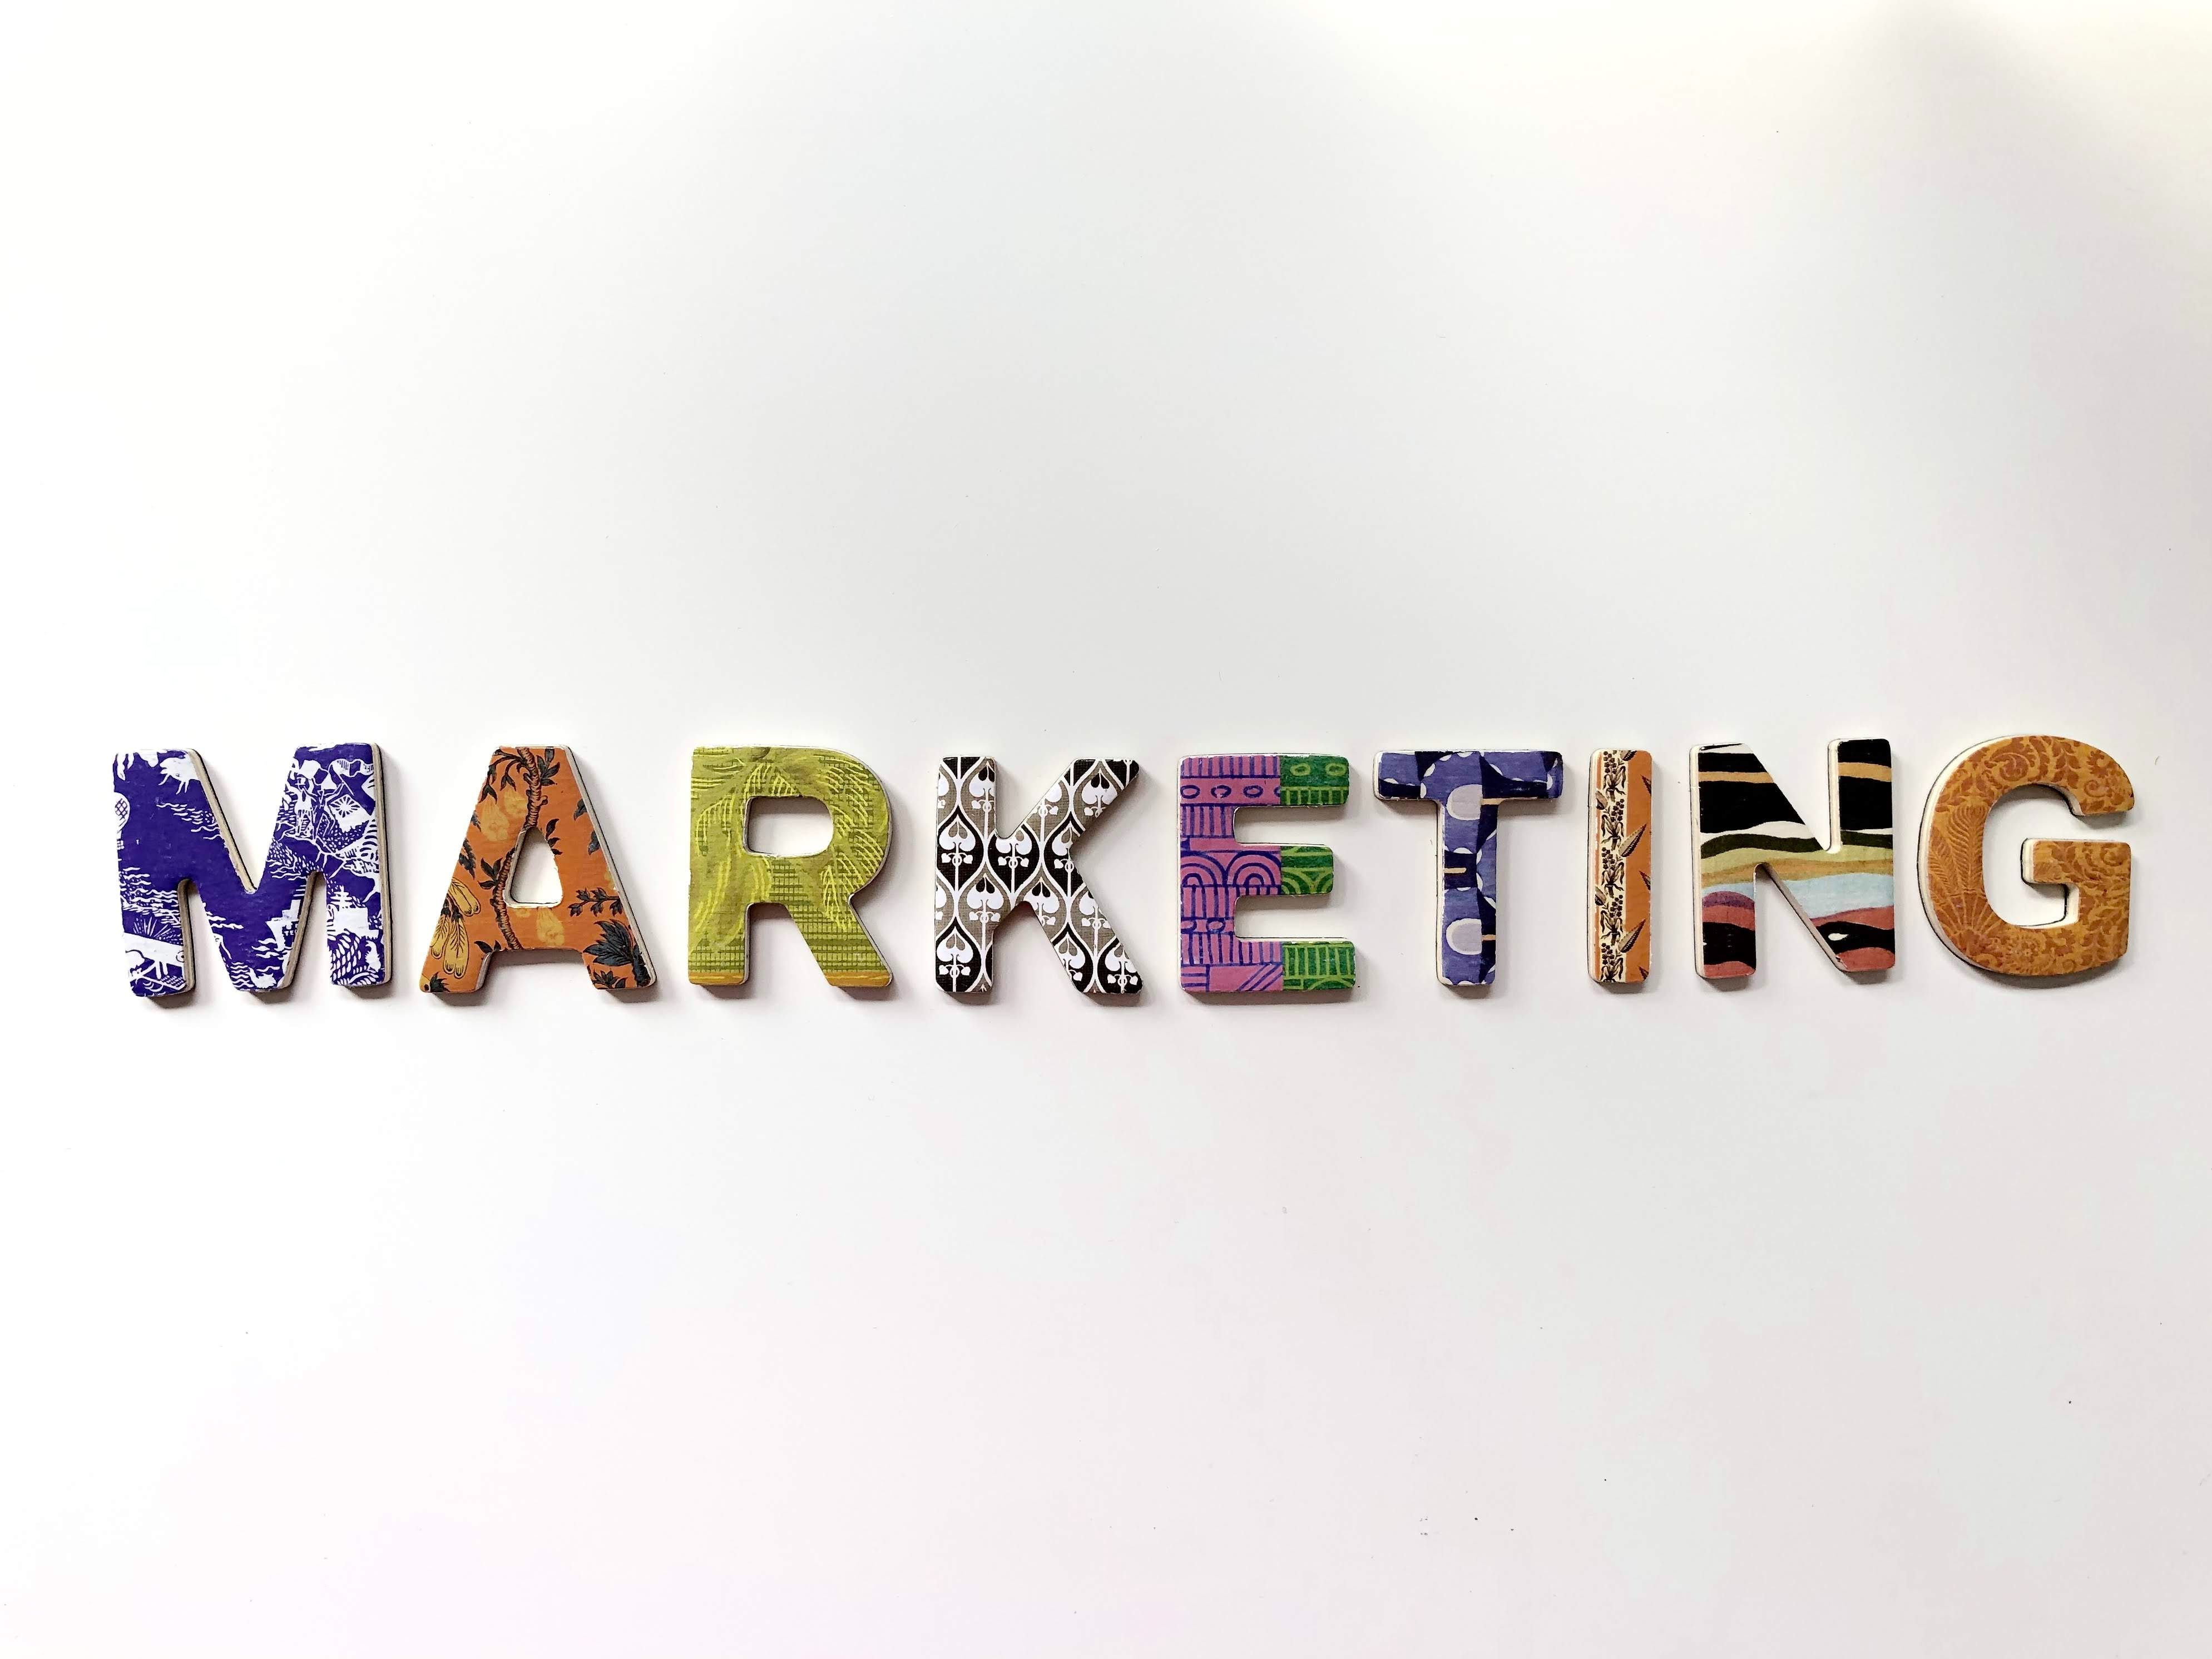 Learn What Marketing Is and How It Is Used